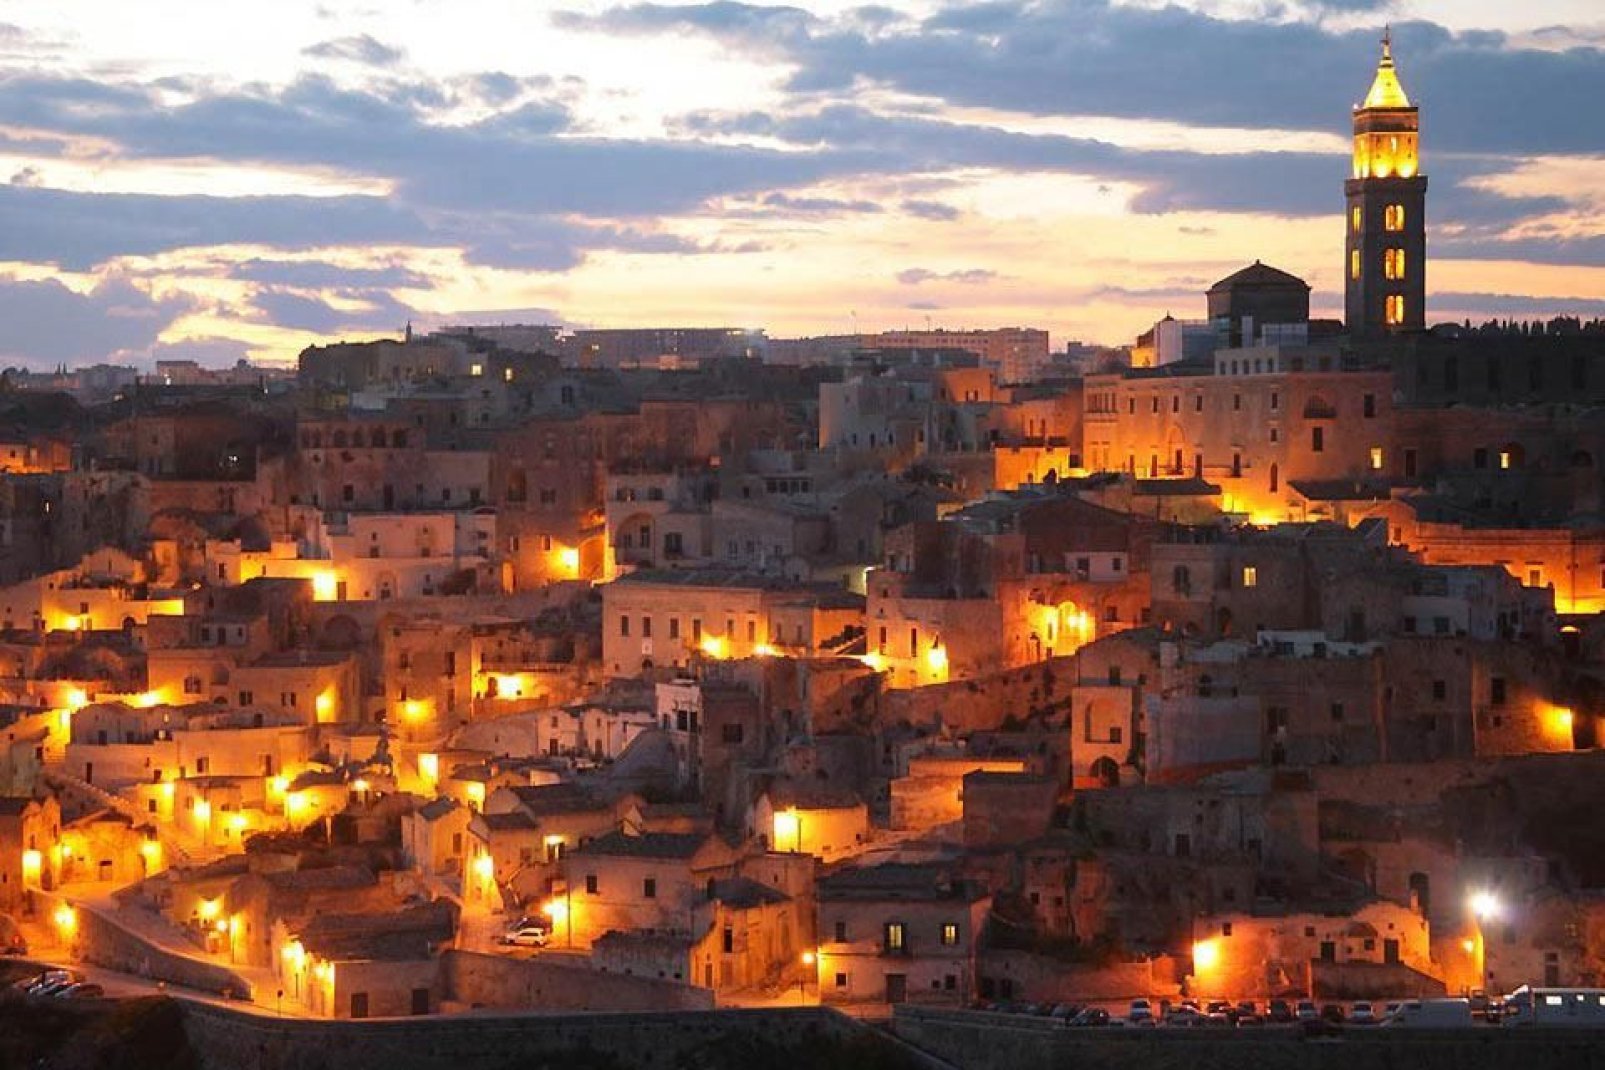 The Sassi de Matera are defined as a cultural landscape and are now listed as a Unesco World Heritage Site.